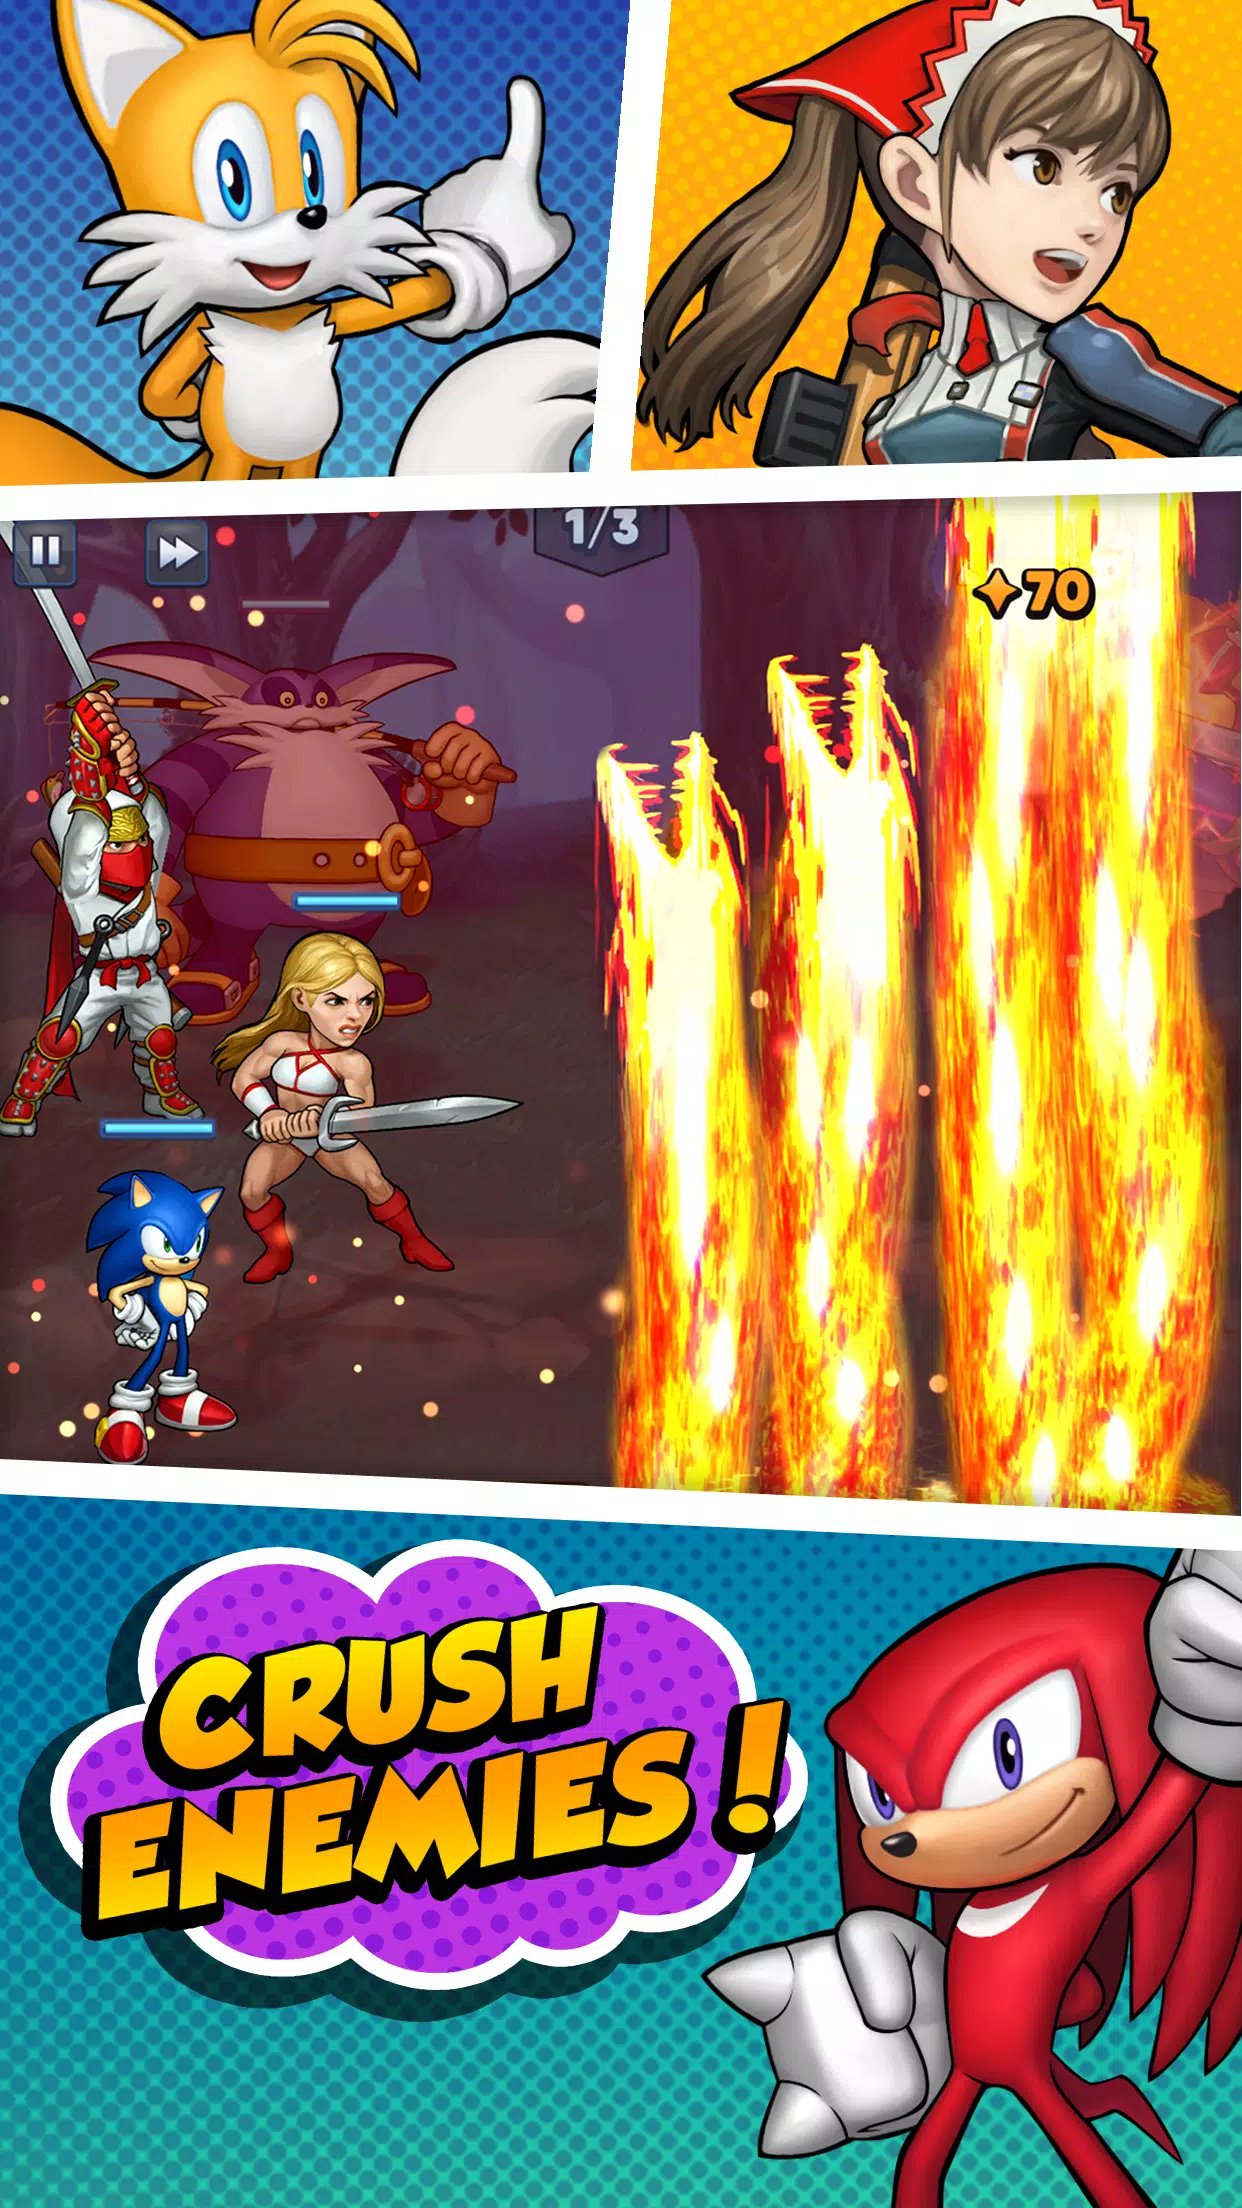 How to download and play Sonic Classic Heroes on Android! 